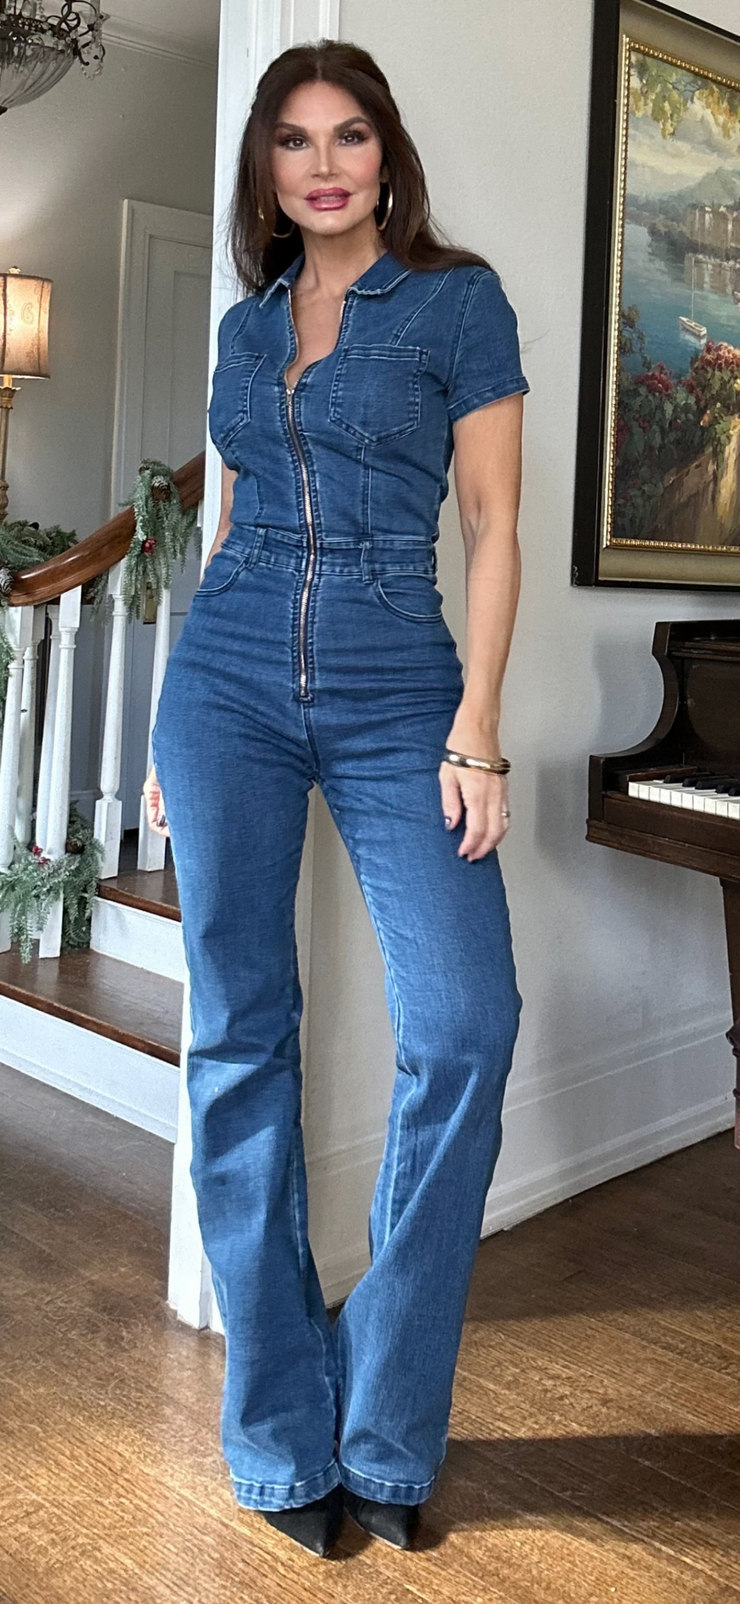 Dolly bootcut jean jumpsuit